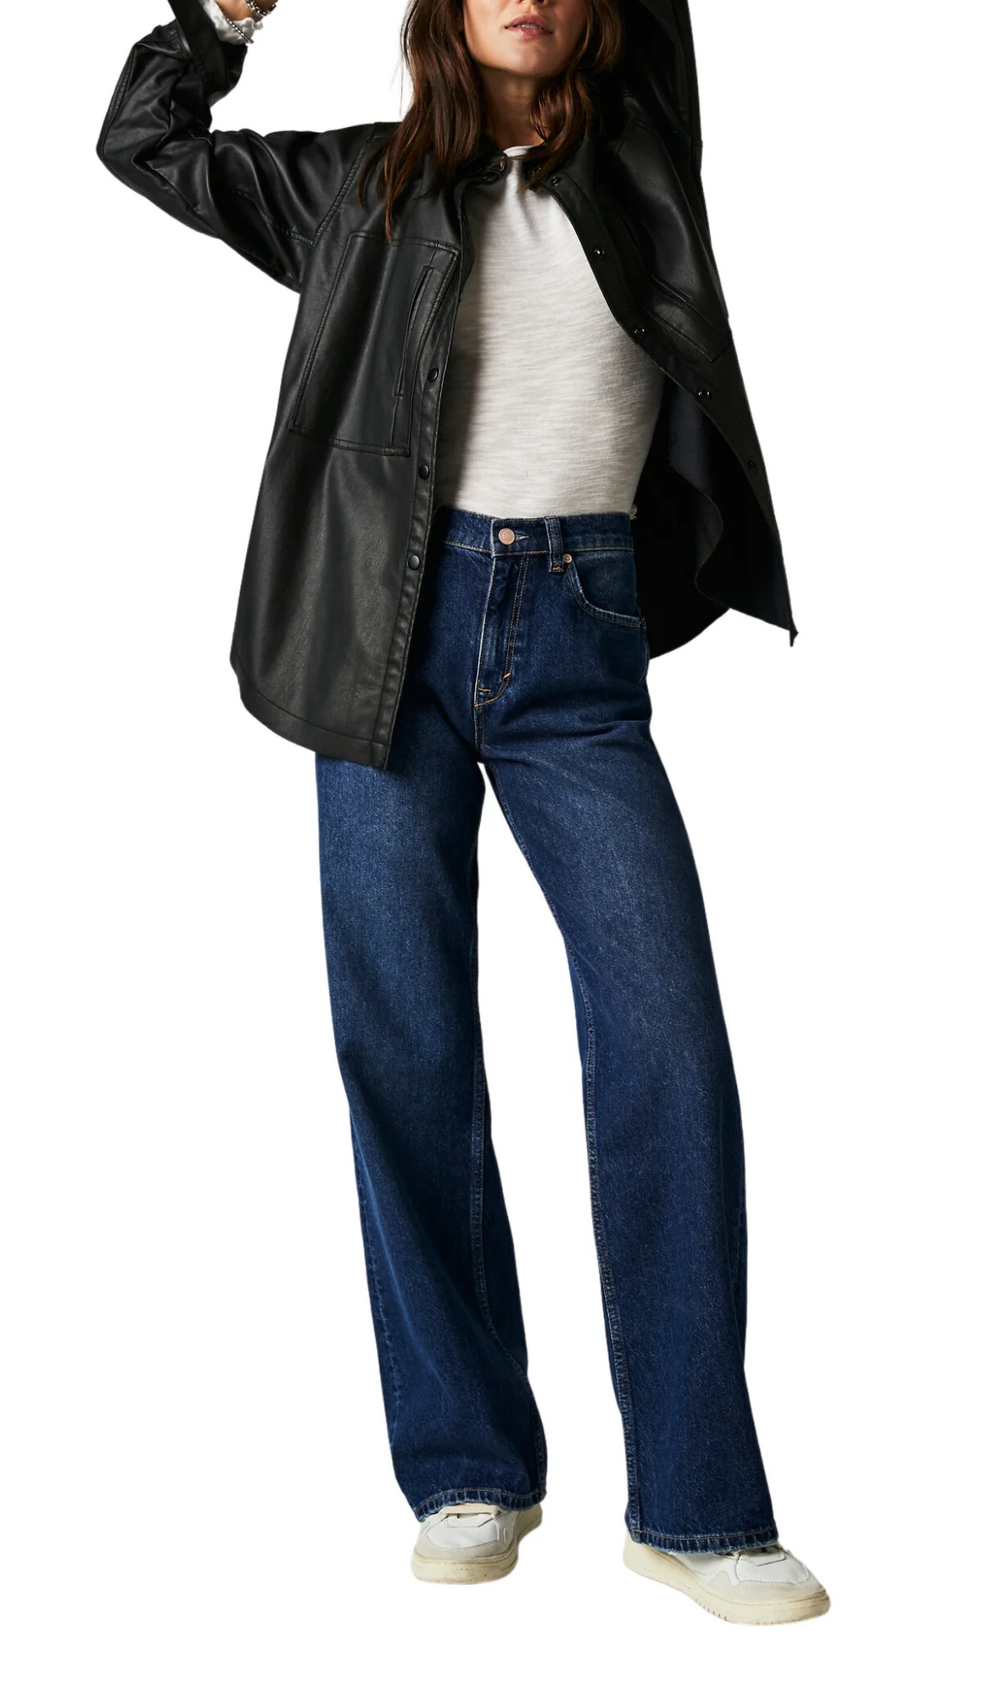 Tinsley Baggy High Rise Jeans in Dark Romance - Madison&